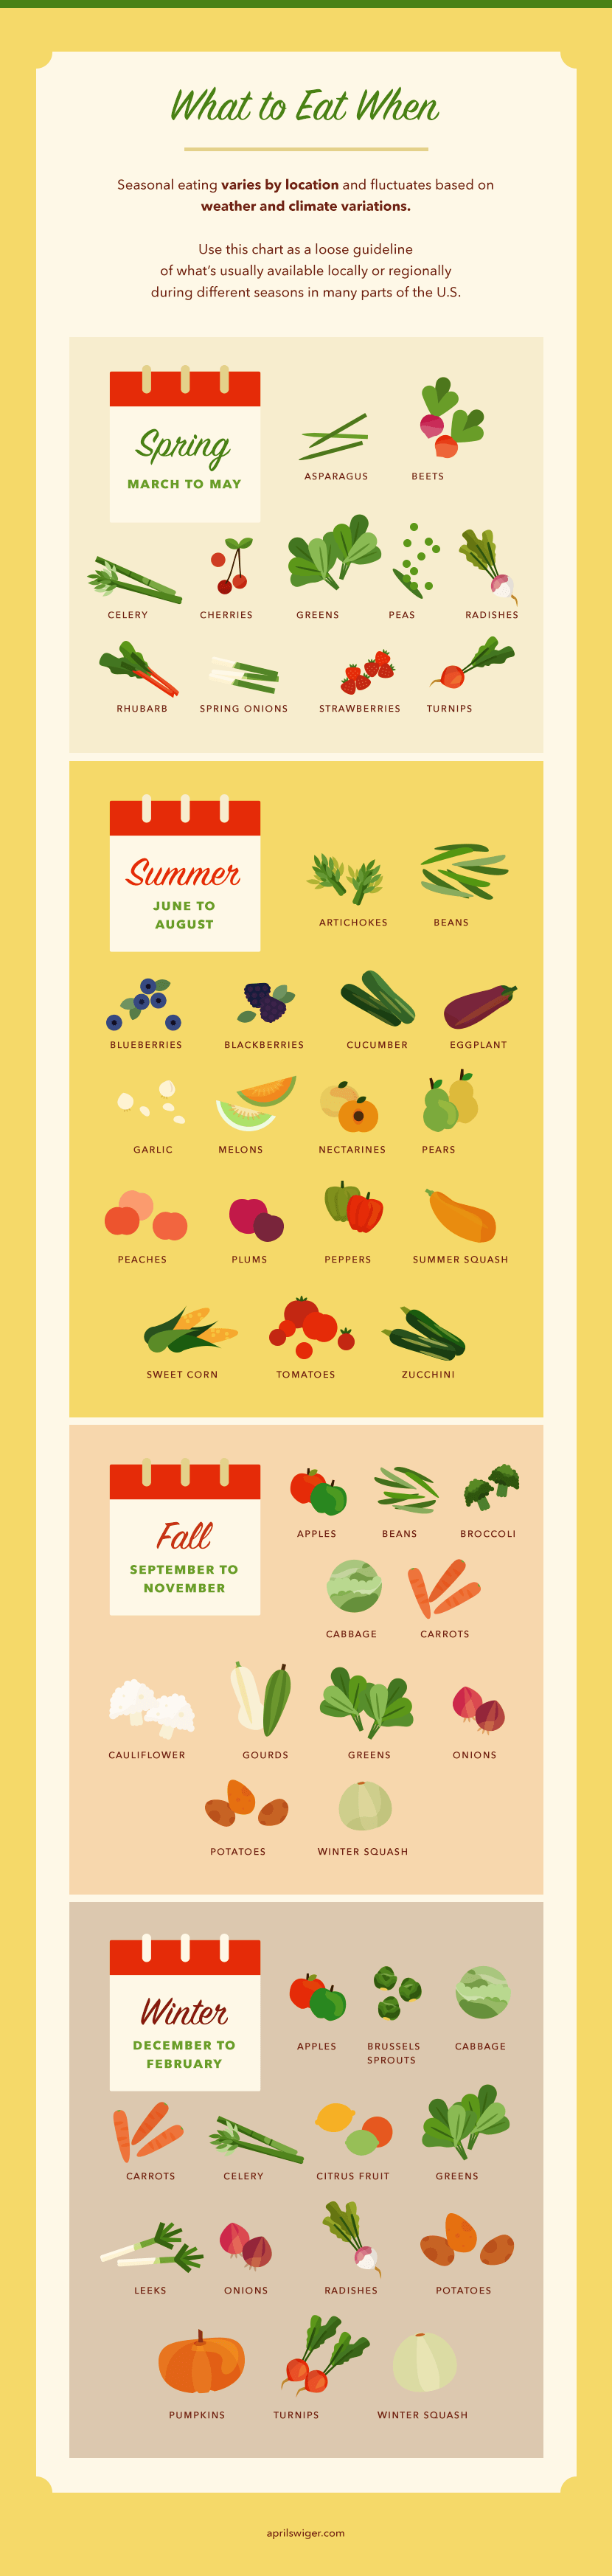 Guide to Eating Seasonally: Knowing What's In Season